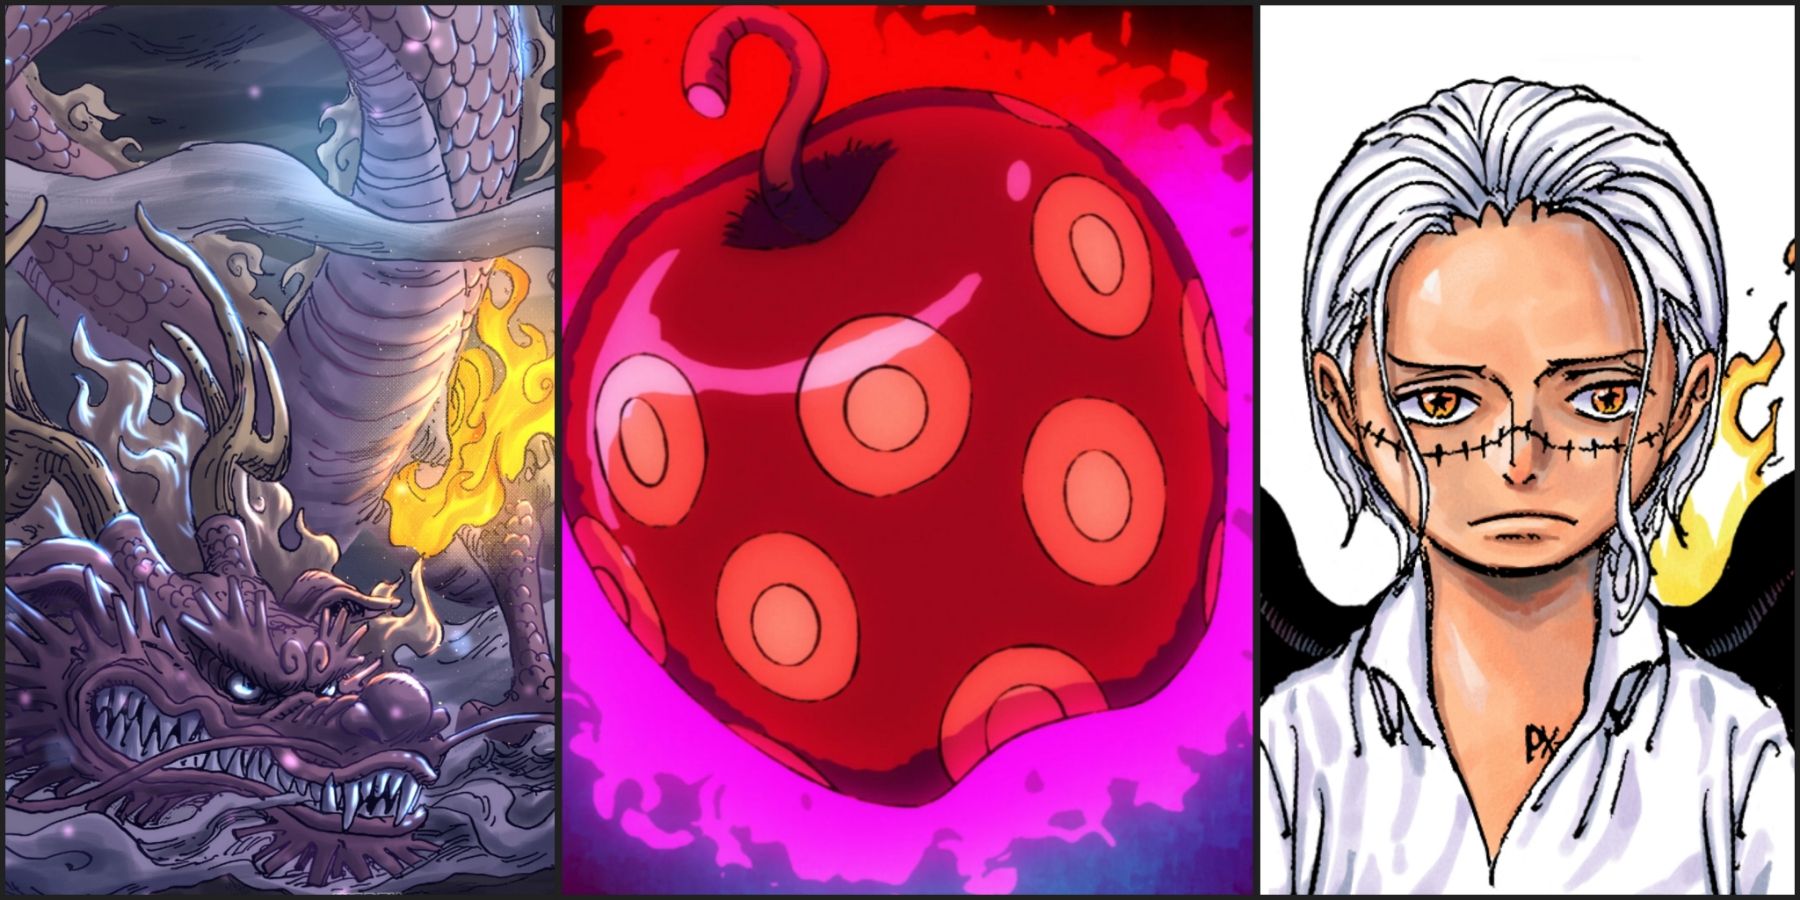 Theory – The Devil Fruit Link between Brook and Vegapunk & The